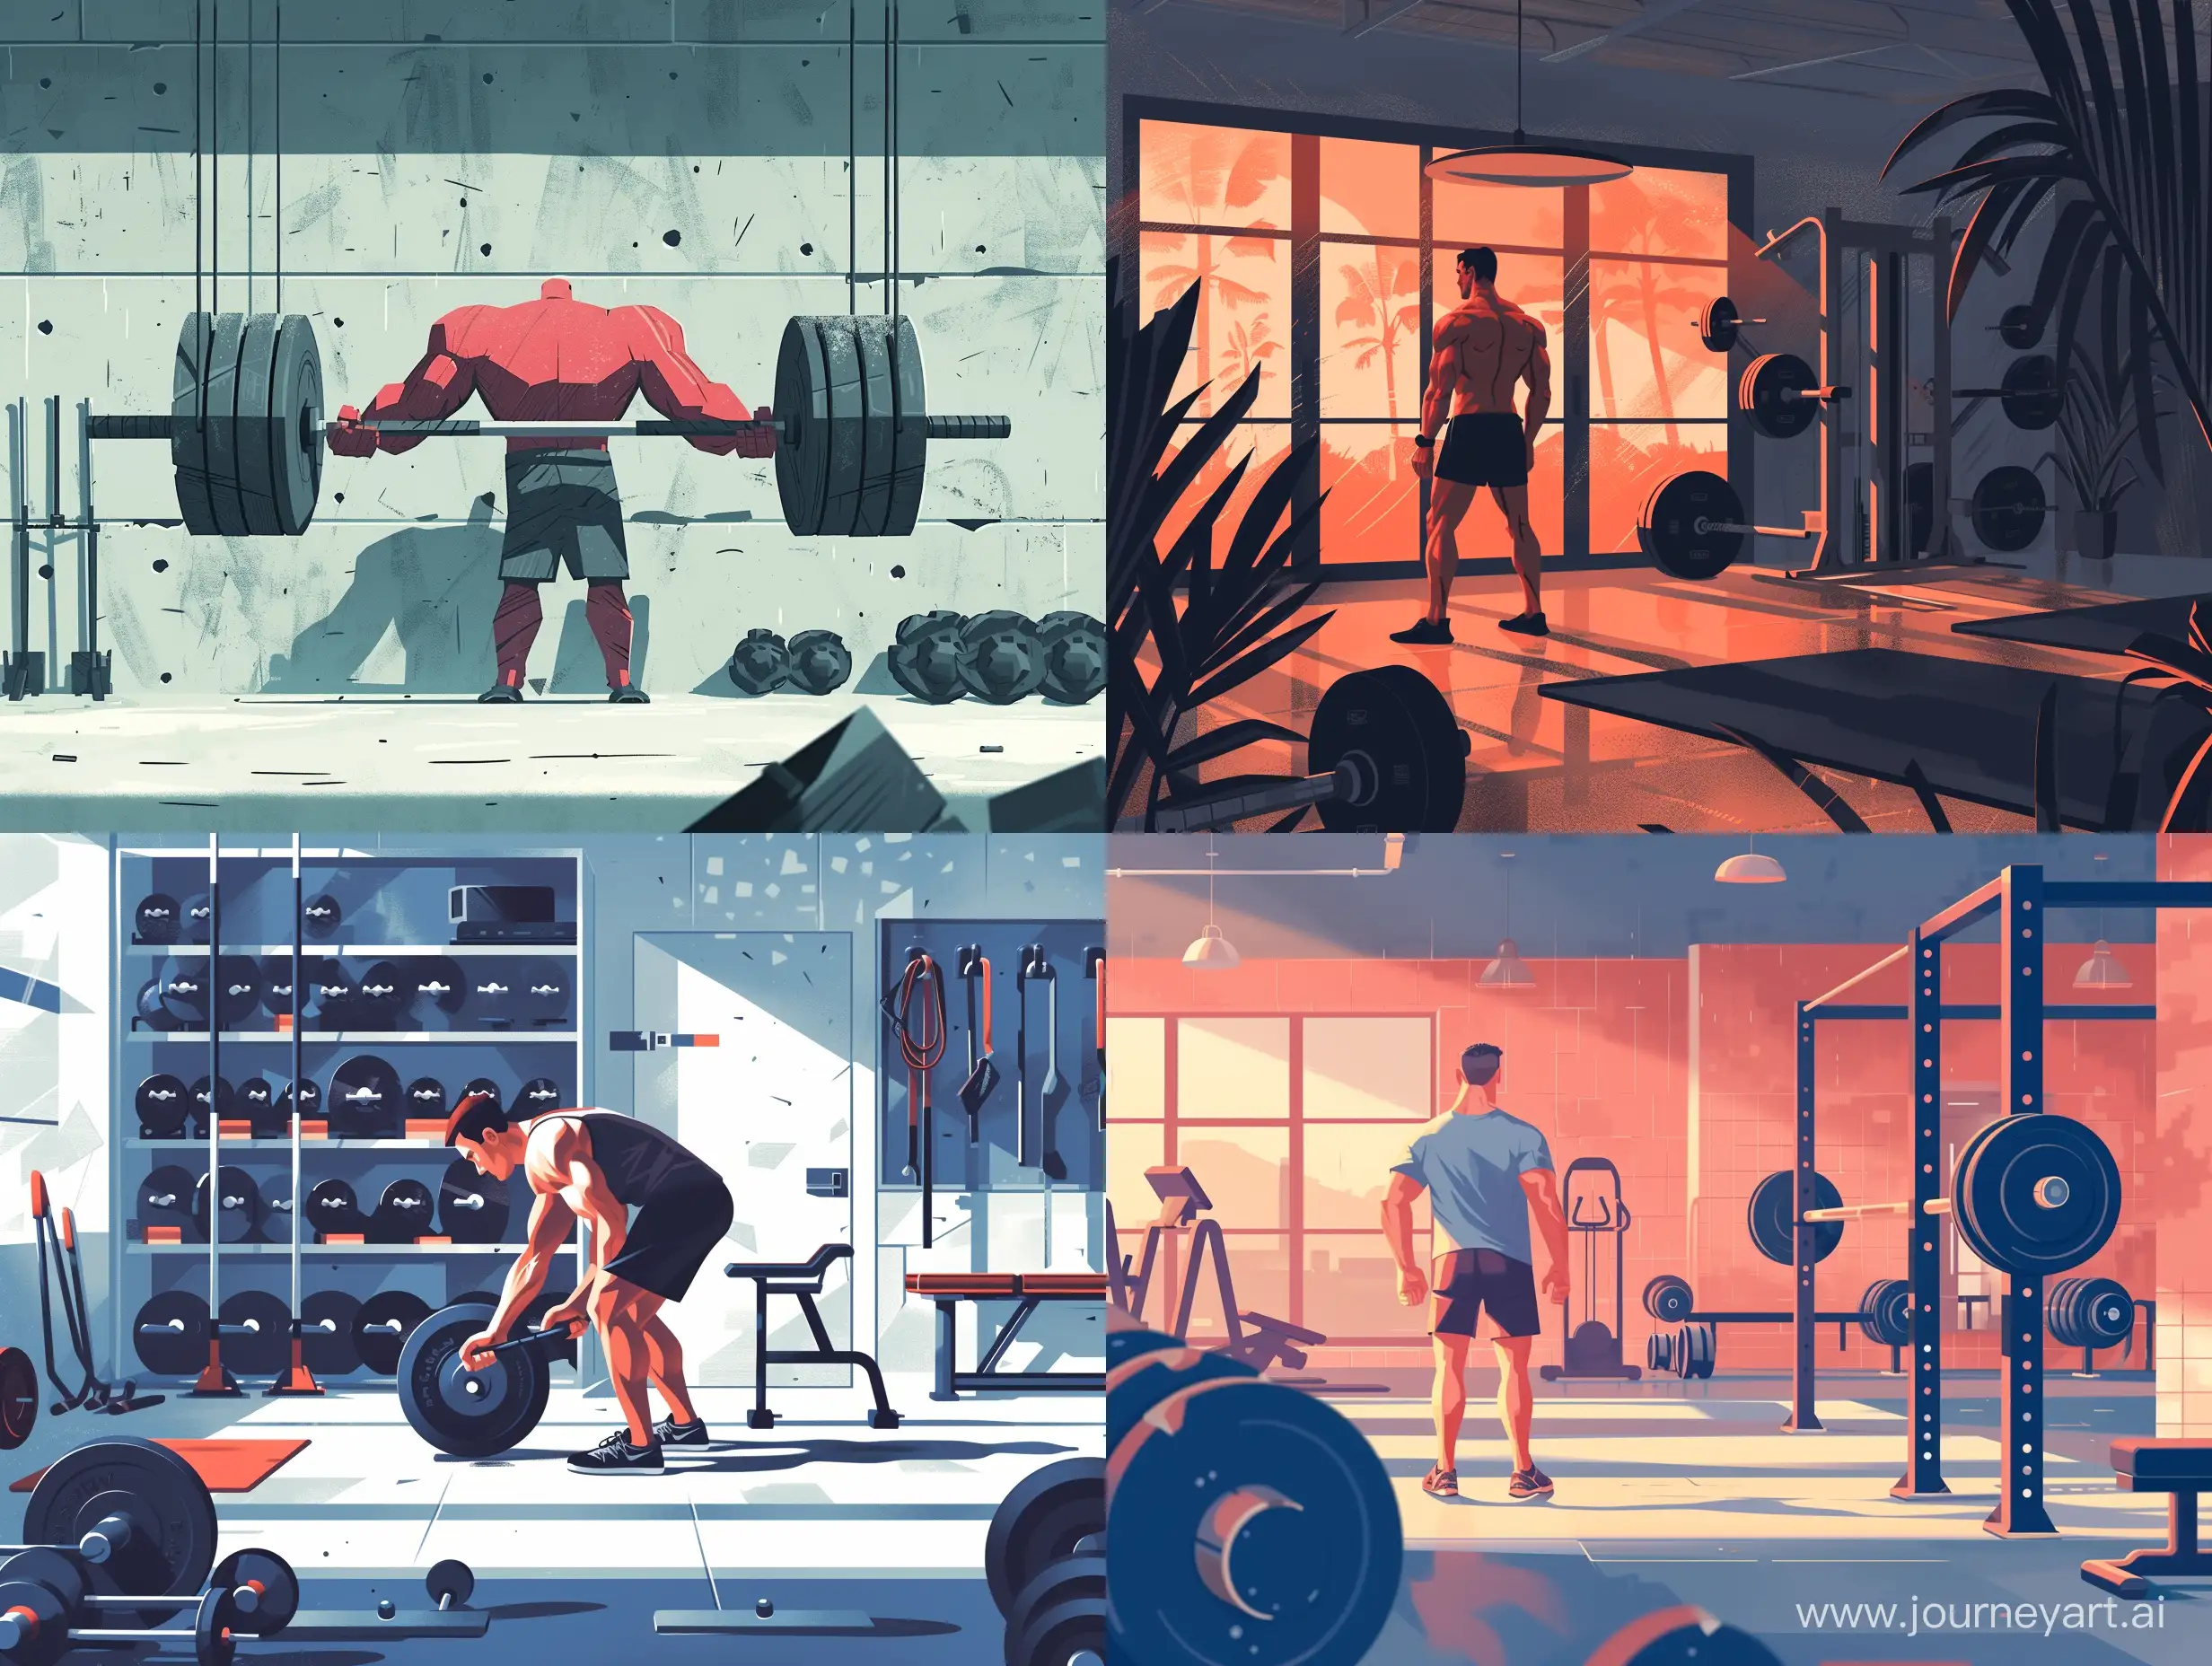 /imagine prompt: Illustrate in flat design a Caucasian man deeply engrossed in lifting weights in a sleek gym environment, using stark, bold color contrasts and clear, simple lines, surrounded by minimalist-style gym gear including weight plates and fitness mats, symbolizing robust energy and commitment to fitness.::3 concept art::3  --version 6 